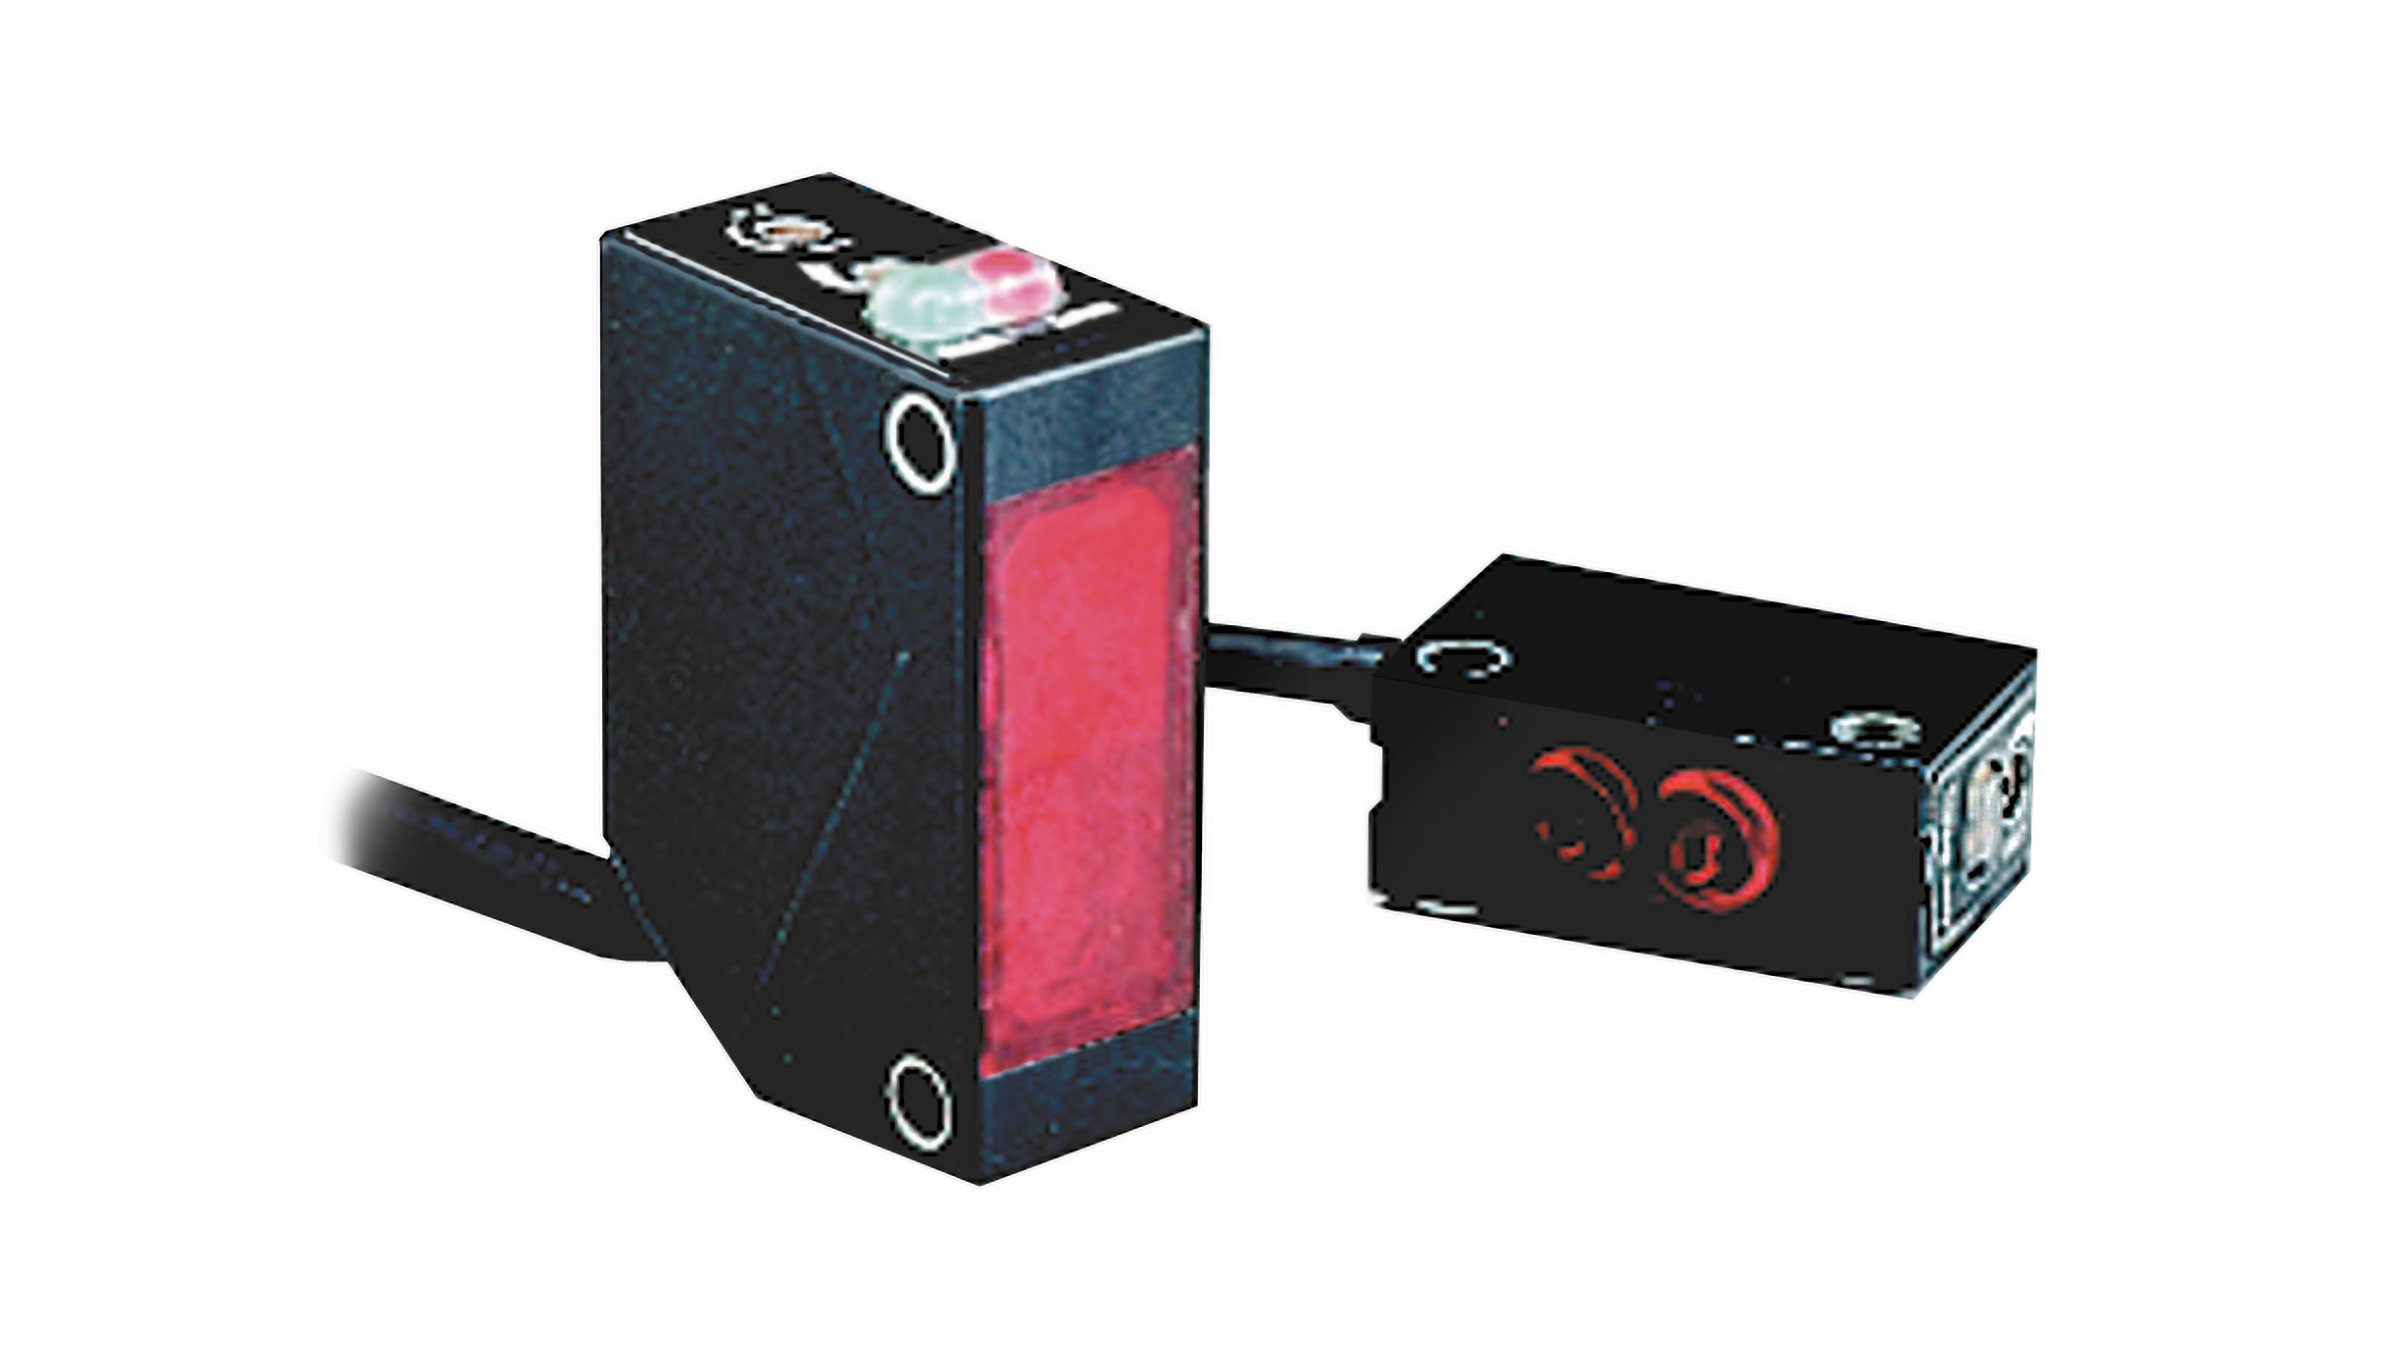 Black Allen-Bradley rectangular sensor with integrated cable, red sensing face on the side and red and green LED indicators on the top.